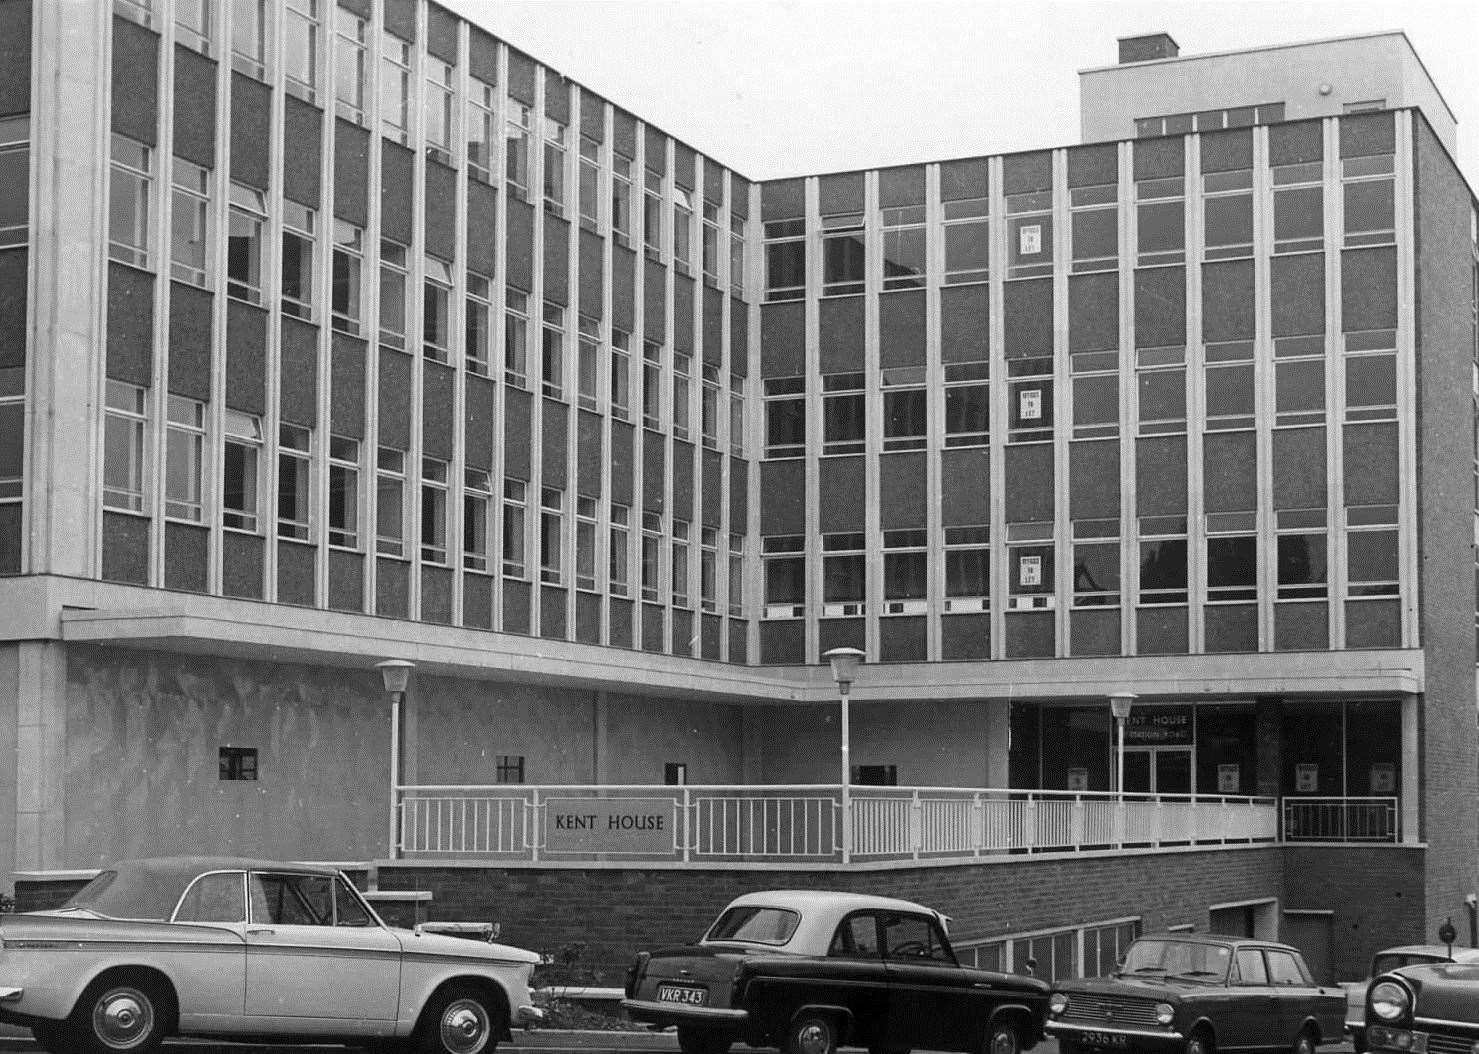 How Kent House in Ashford looked in 1966